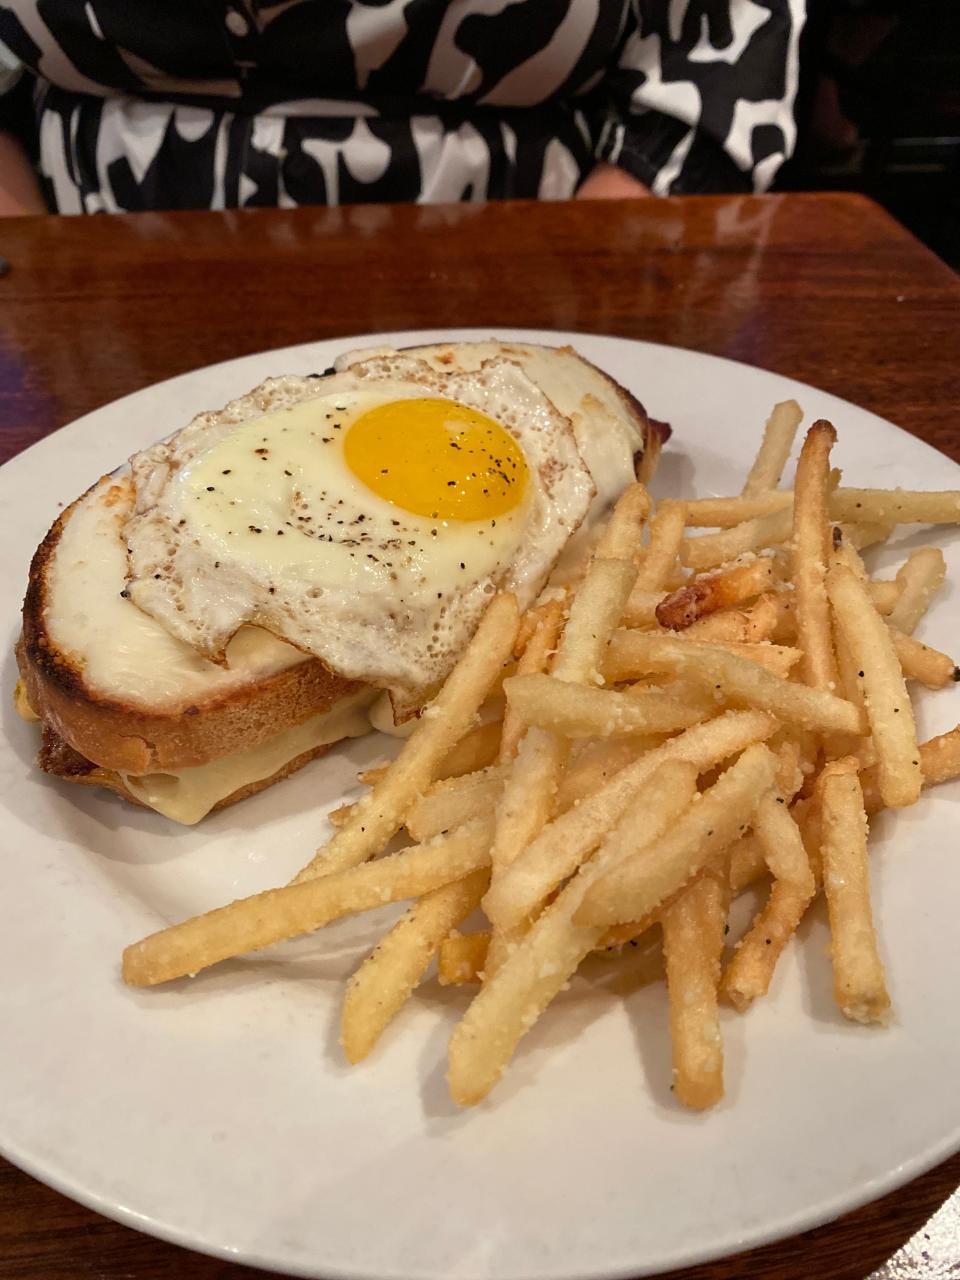 The Grilled Cheese "Deluxe" at The Majestic Grille. This weekend brunch dish is a grilled cheese stuffed with cheddar cheese, bacon, tomato and Creole mustard that is topped with béchamel sauce and a sunny side egg.